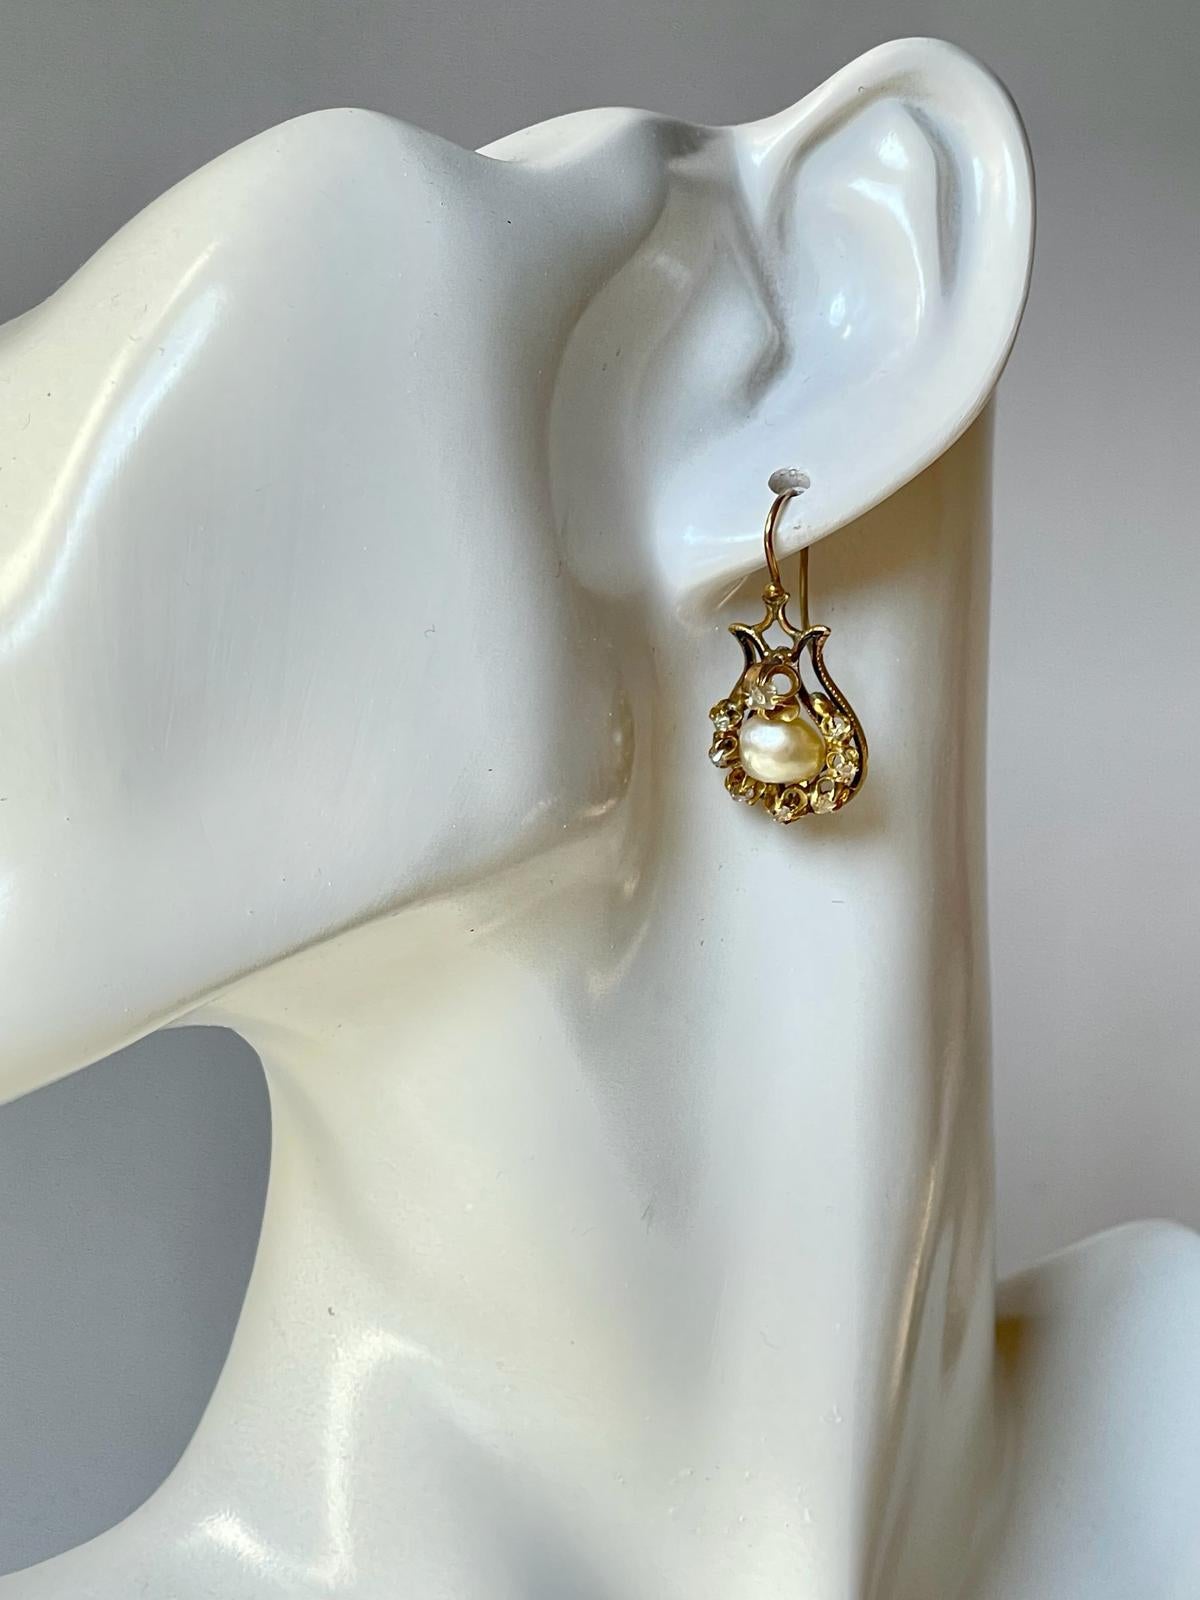 A lovely pair of antique C 1880 late Victorian earrings in black enameled 18K yellow gold highlighted by cushion cut diamonds and centered with 2 certified natural saltwater baroque pearls. The natural saltwater pearls are very rare to find nowadays